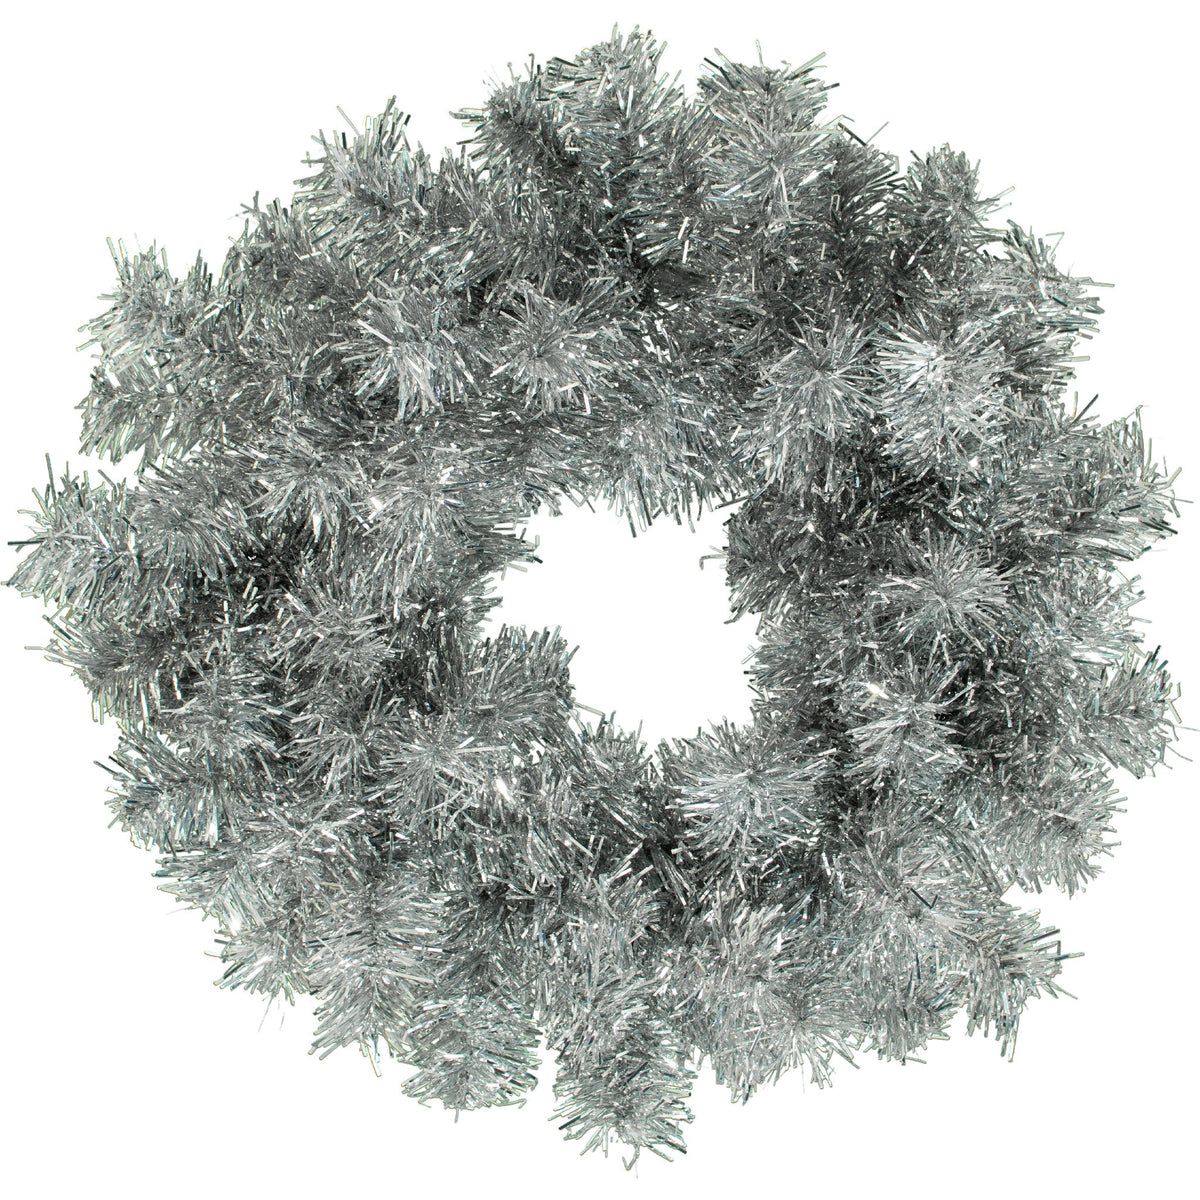 Introducing our 18in Silver Tinsel Christmas Wreaths - the perfect addition to your holiday décor!